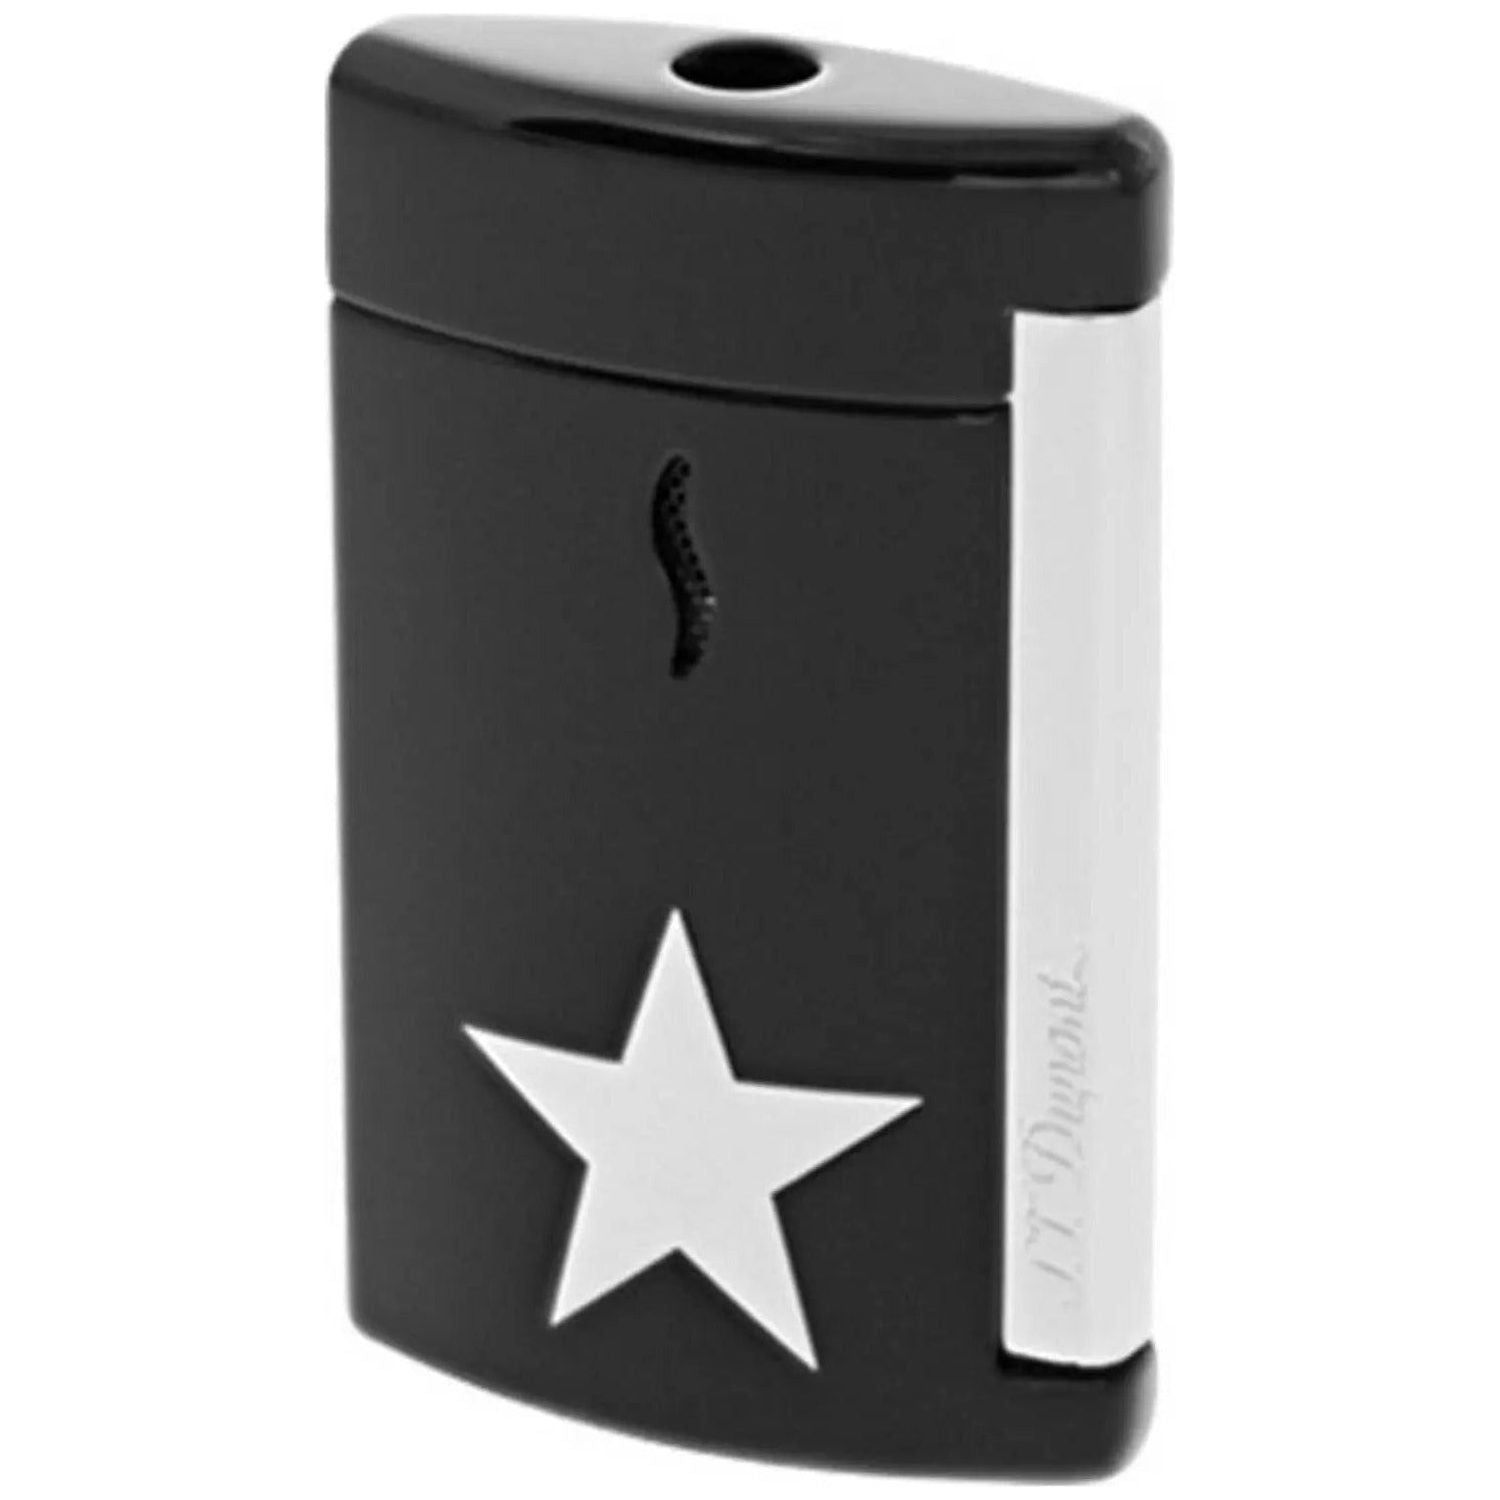 DUPONT S.T. DUPONT MOD. 010090 Luxury Lighters